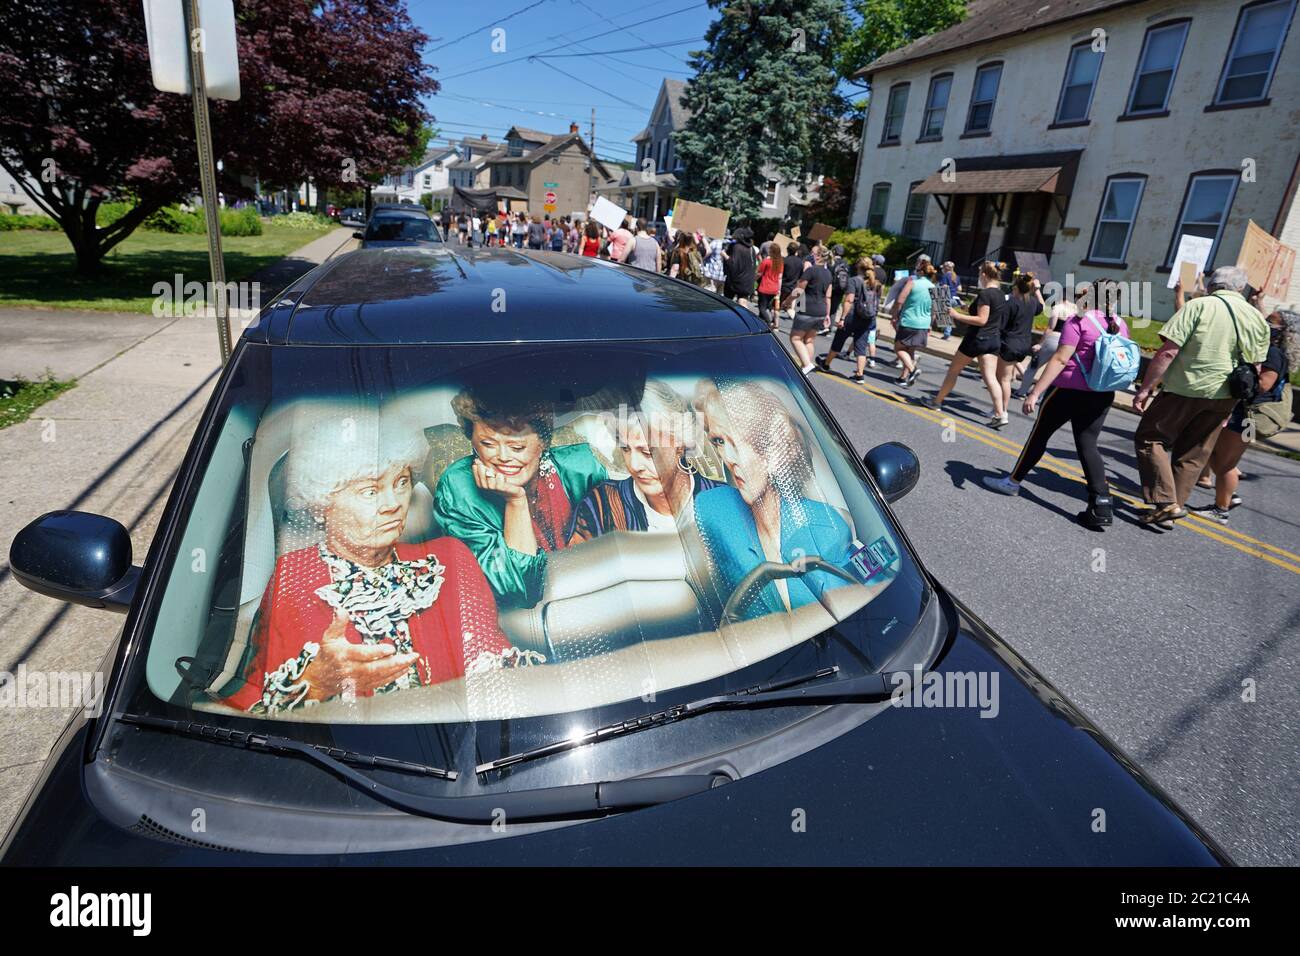 Community members walk past a car with a 'Golden Girls' themed sun shield in a car June 14, 2020, during a peace march in Emmaus, Pennsylvania. Stock Photo